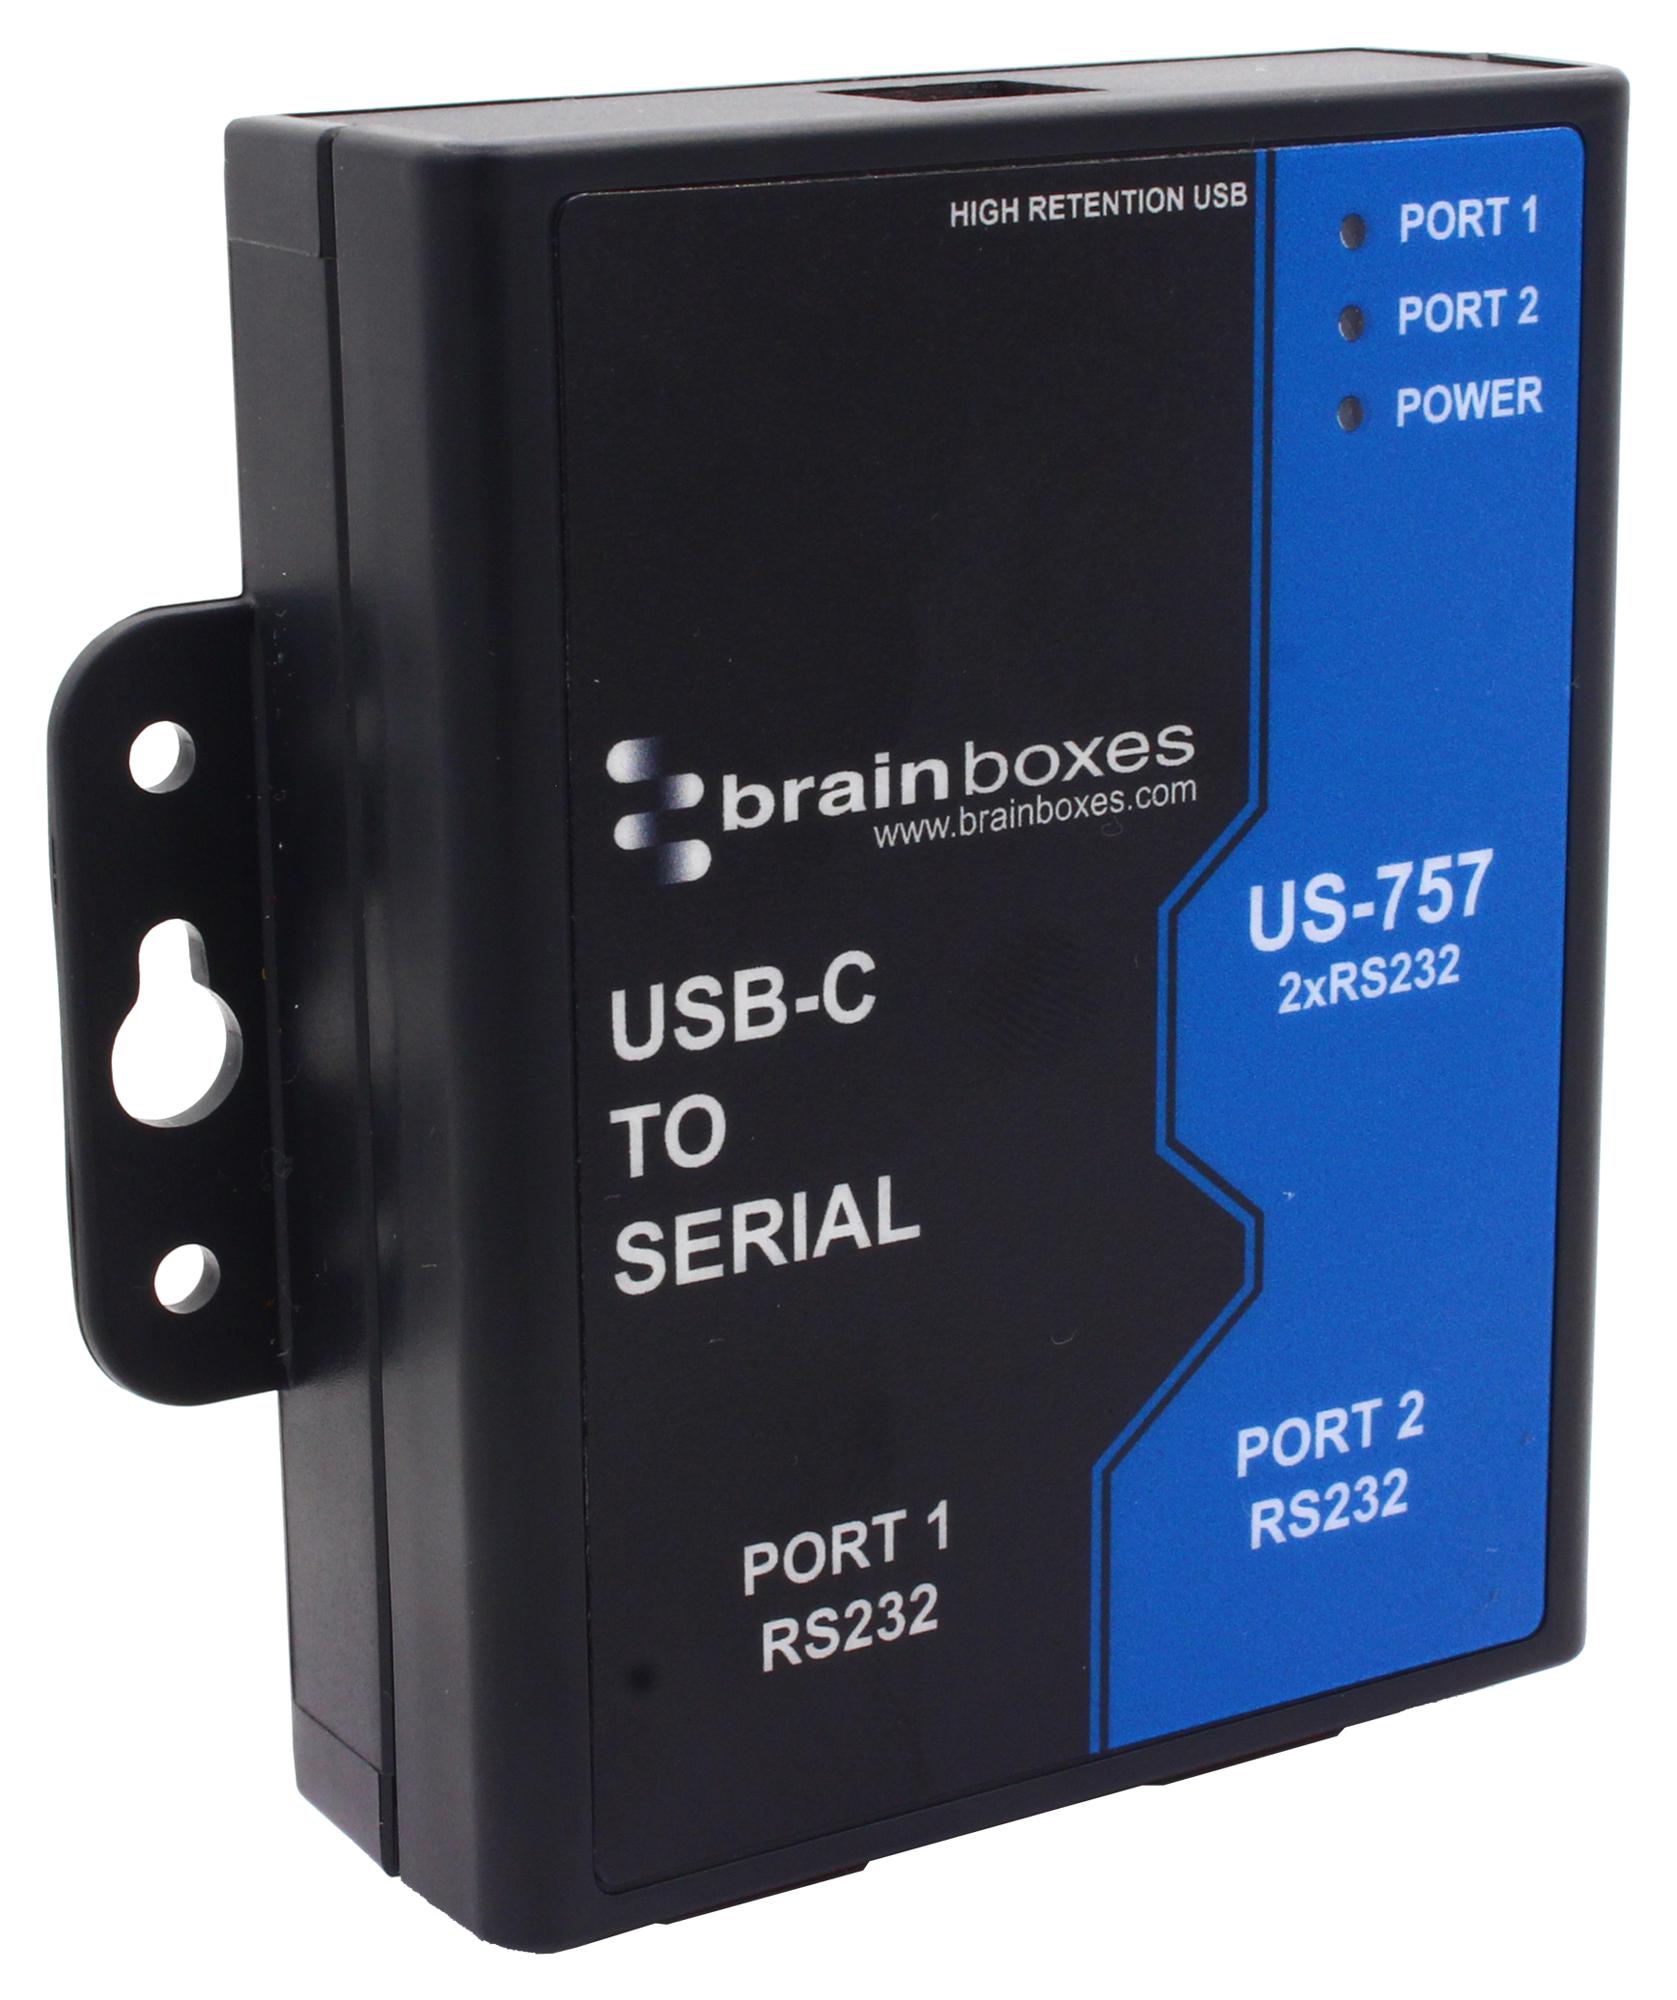 US-757 CONVERTER, USB TO 2 PORT RS-232 SERIAL BRAINBOXES